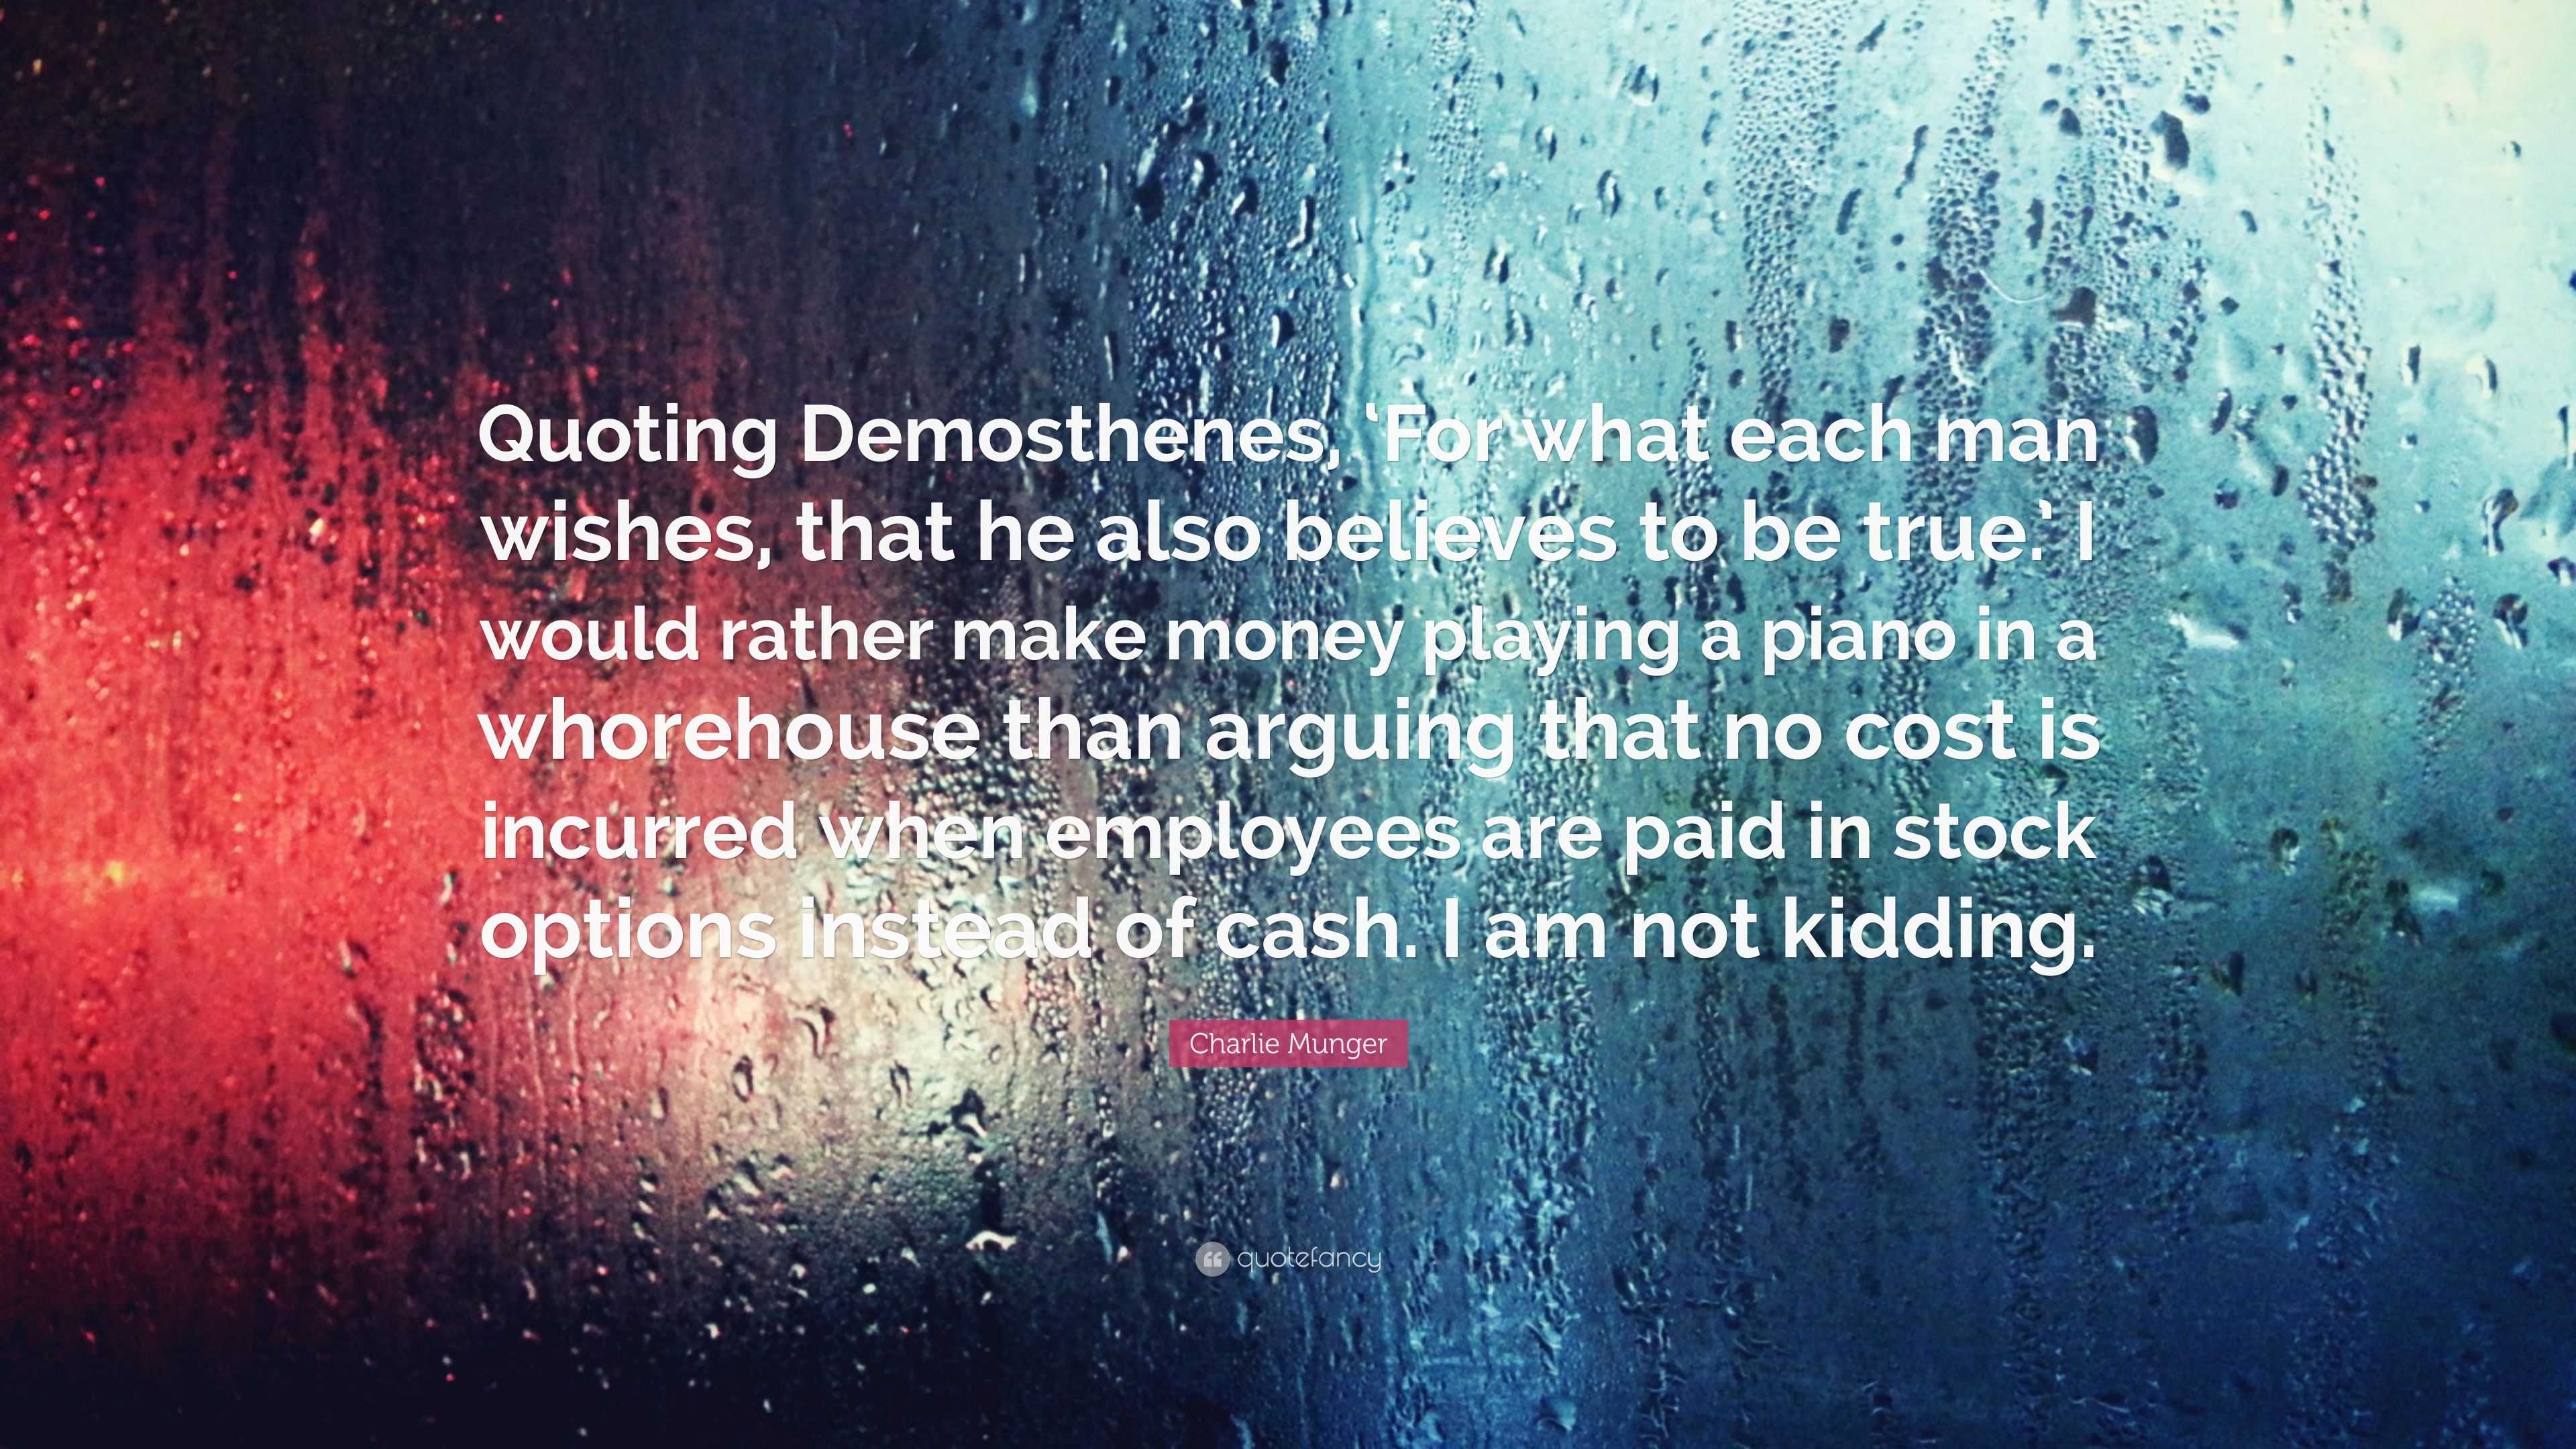 Charlie Munger Quote: “Quoting Demosthenes, ‘For what each man wishes ...